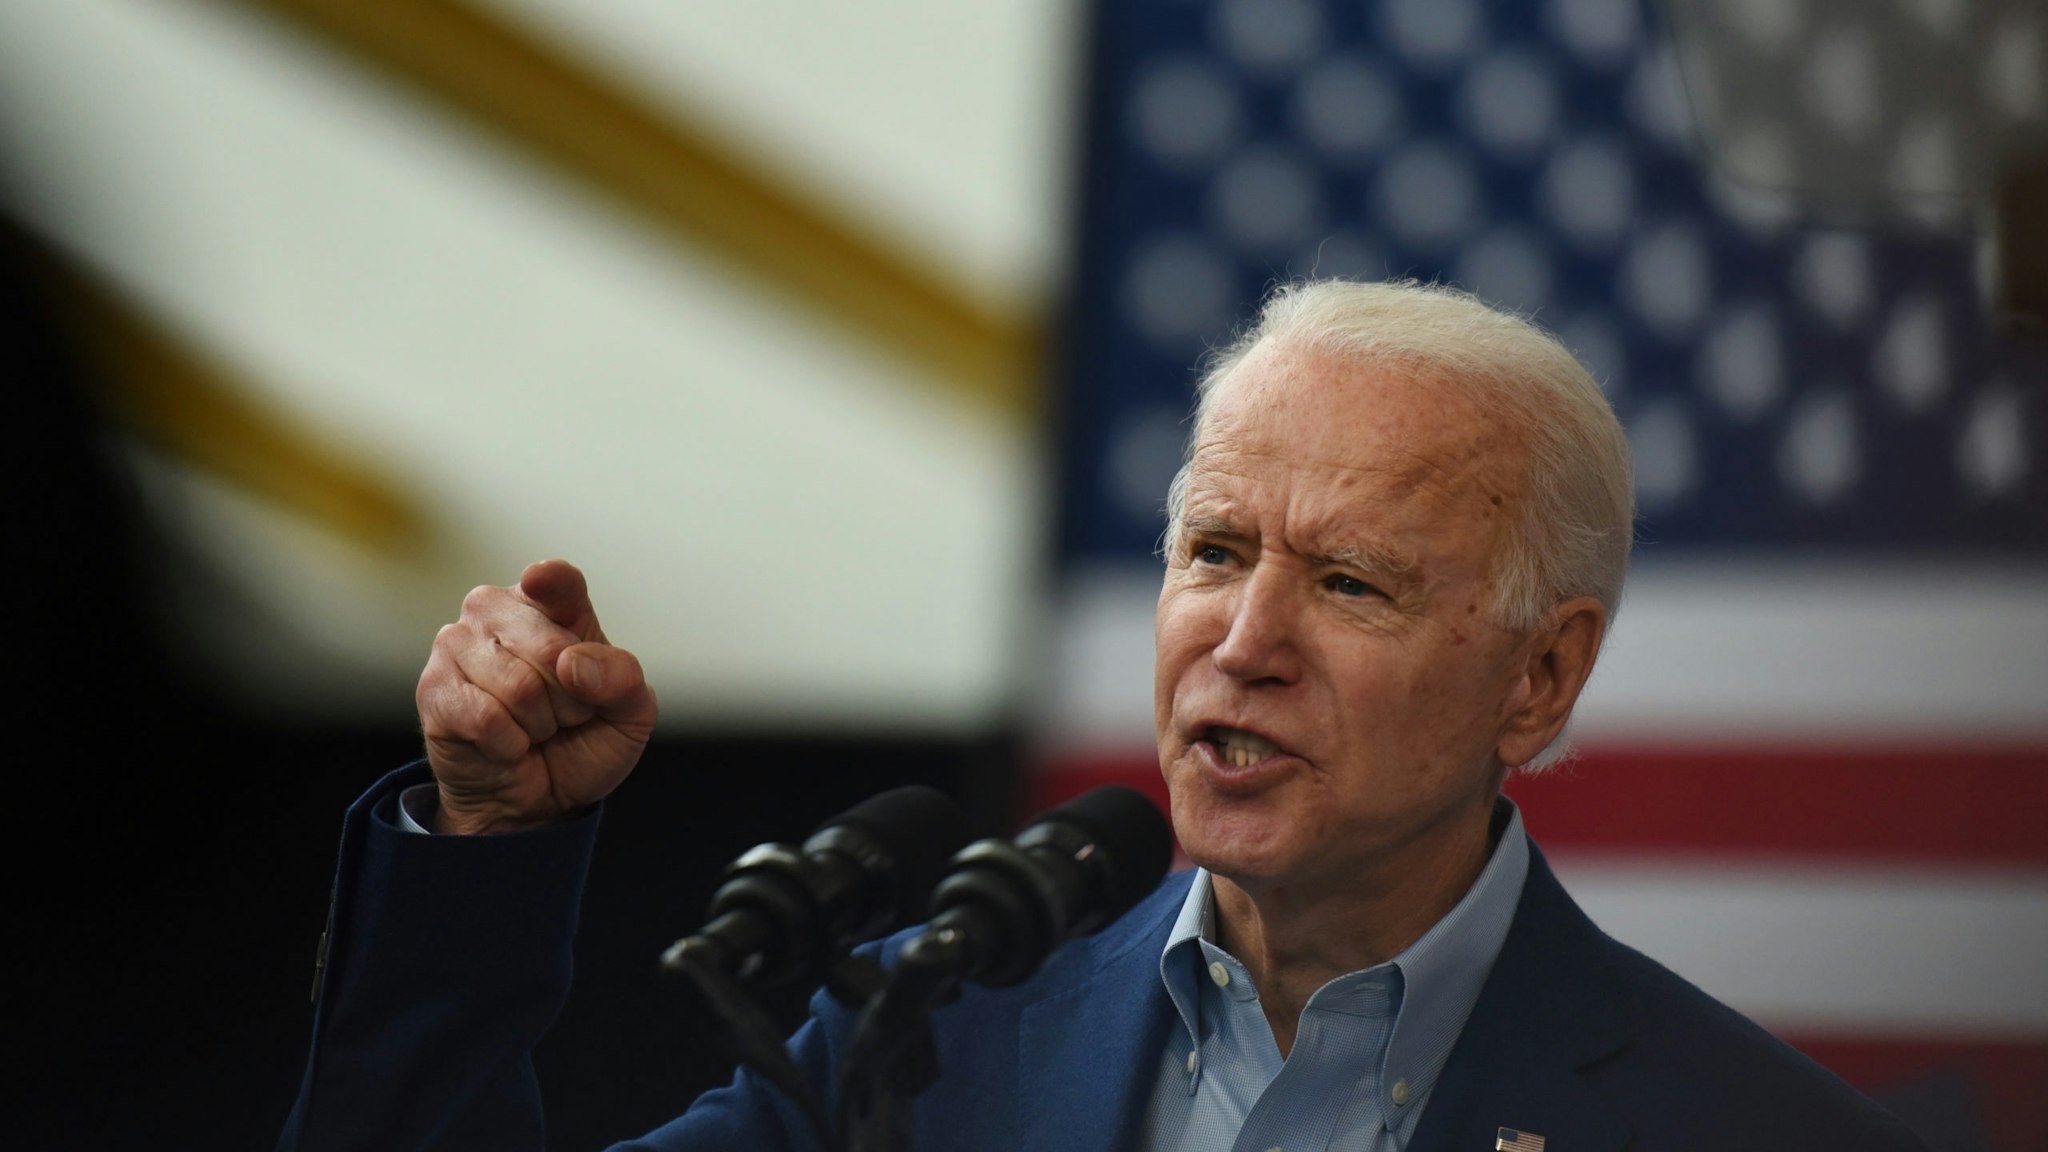 HOUSTON, TX - MARCH 02: Democratic presidential candidate former Vice President Joe Biden speaks to supporters at a campaign event on March 2, 2020 in Houston, Texas. Candidates are campaigning the day before Super Tuesday, when 1,357 Democratic delegates in 14 states across the country will be up for grabs. (Photo by Callaghan O'Hare/Getty Images)